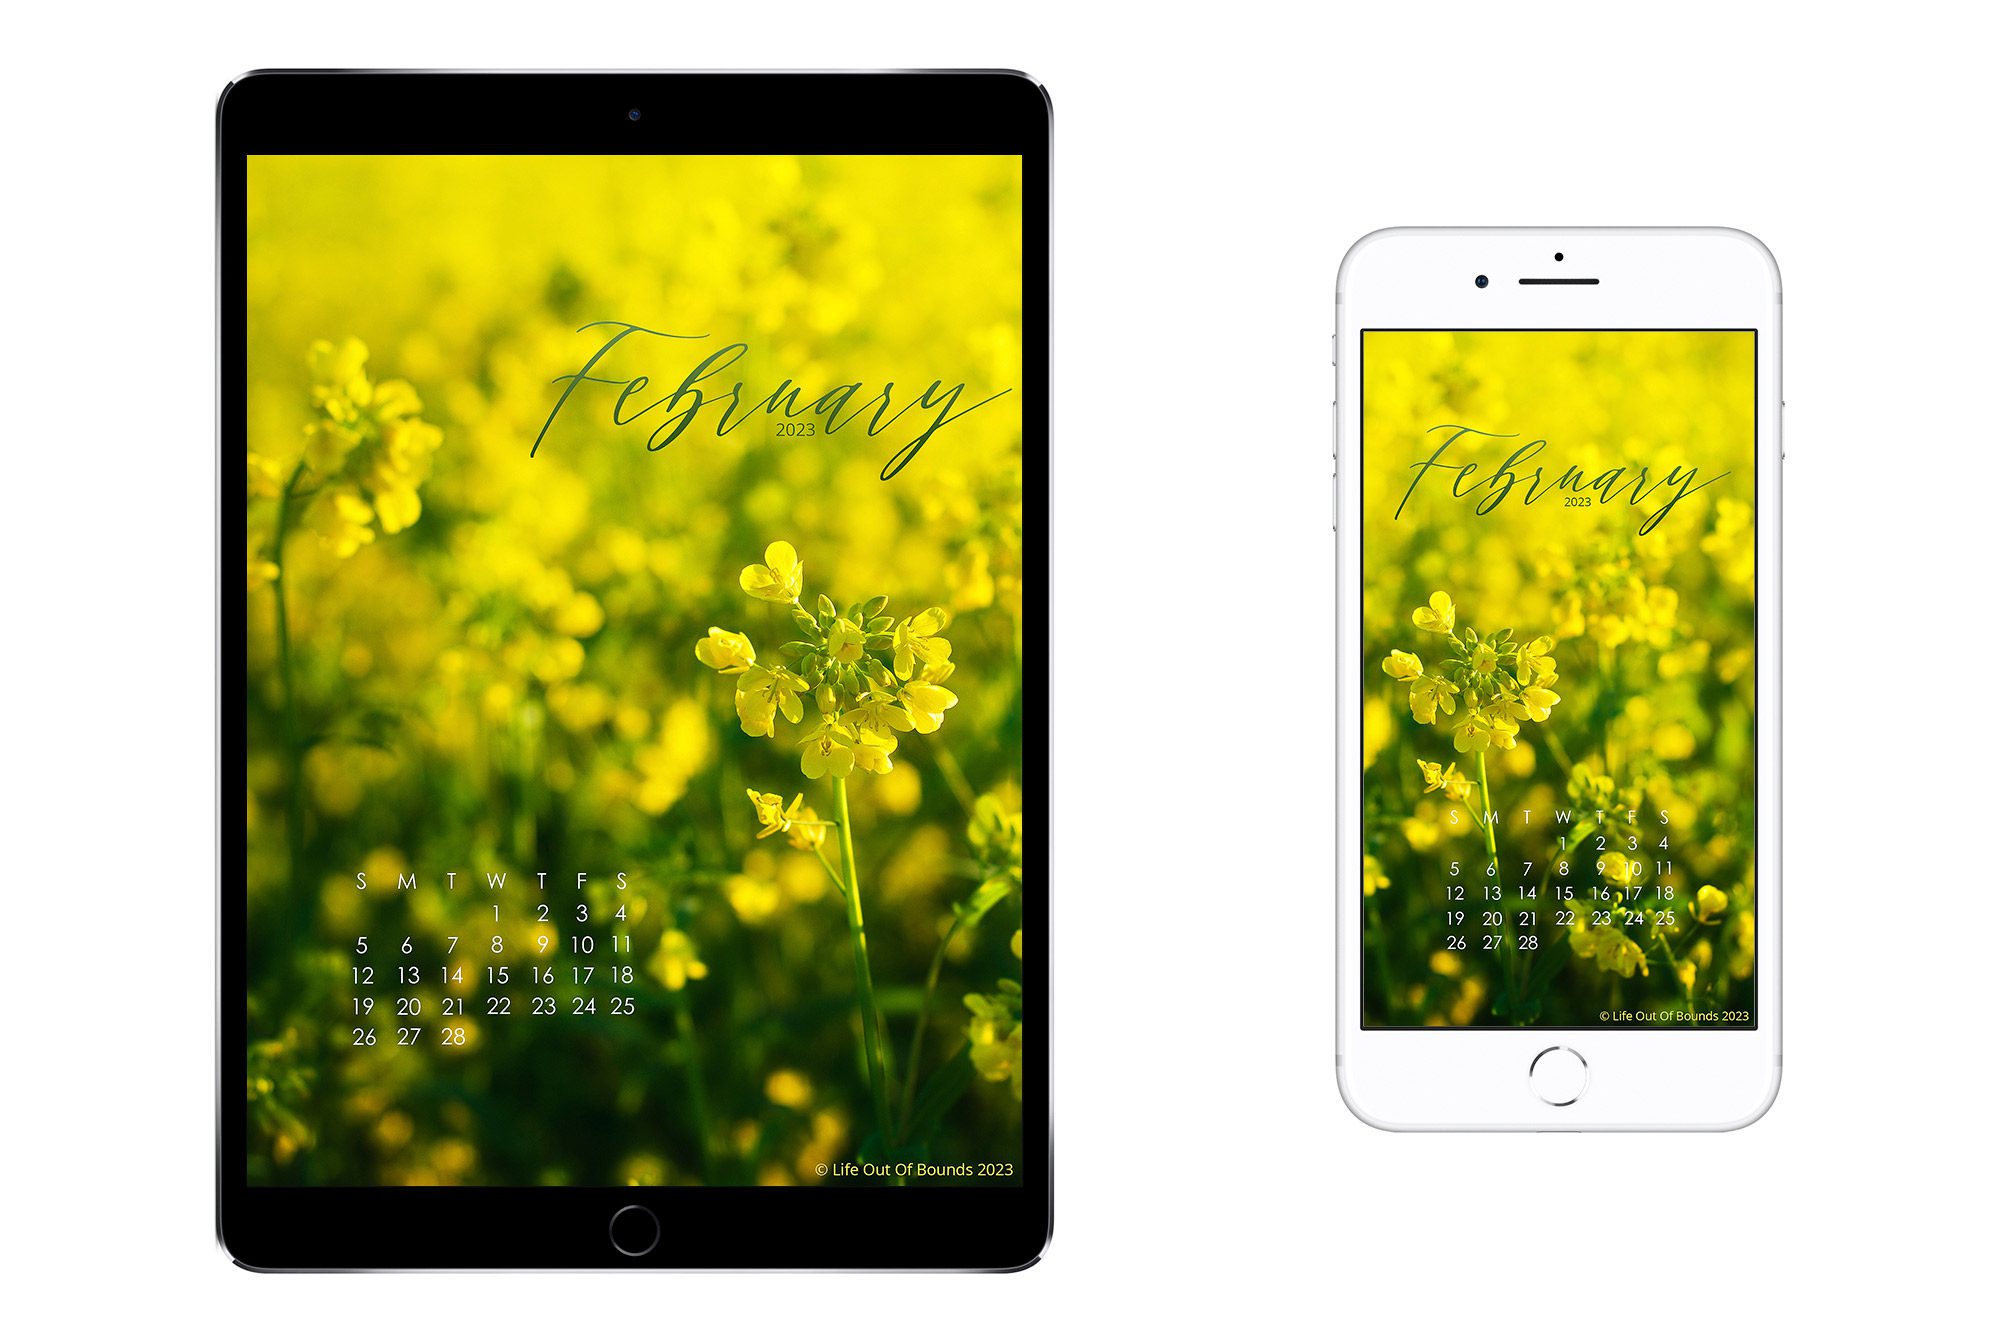 February-23-free-calendar-wallpaper-for-iPad-tablet-iPhone-smartphone-featuring-wild-mustard-in-a-Napa-Valley-Vineyard